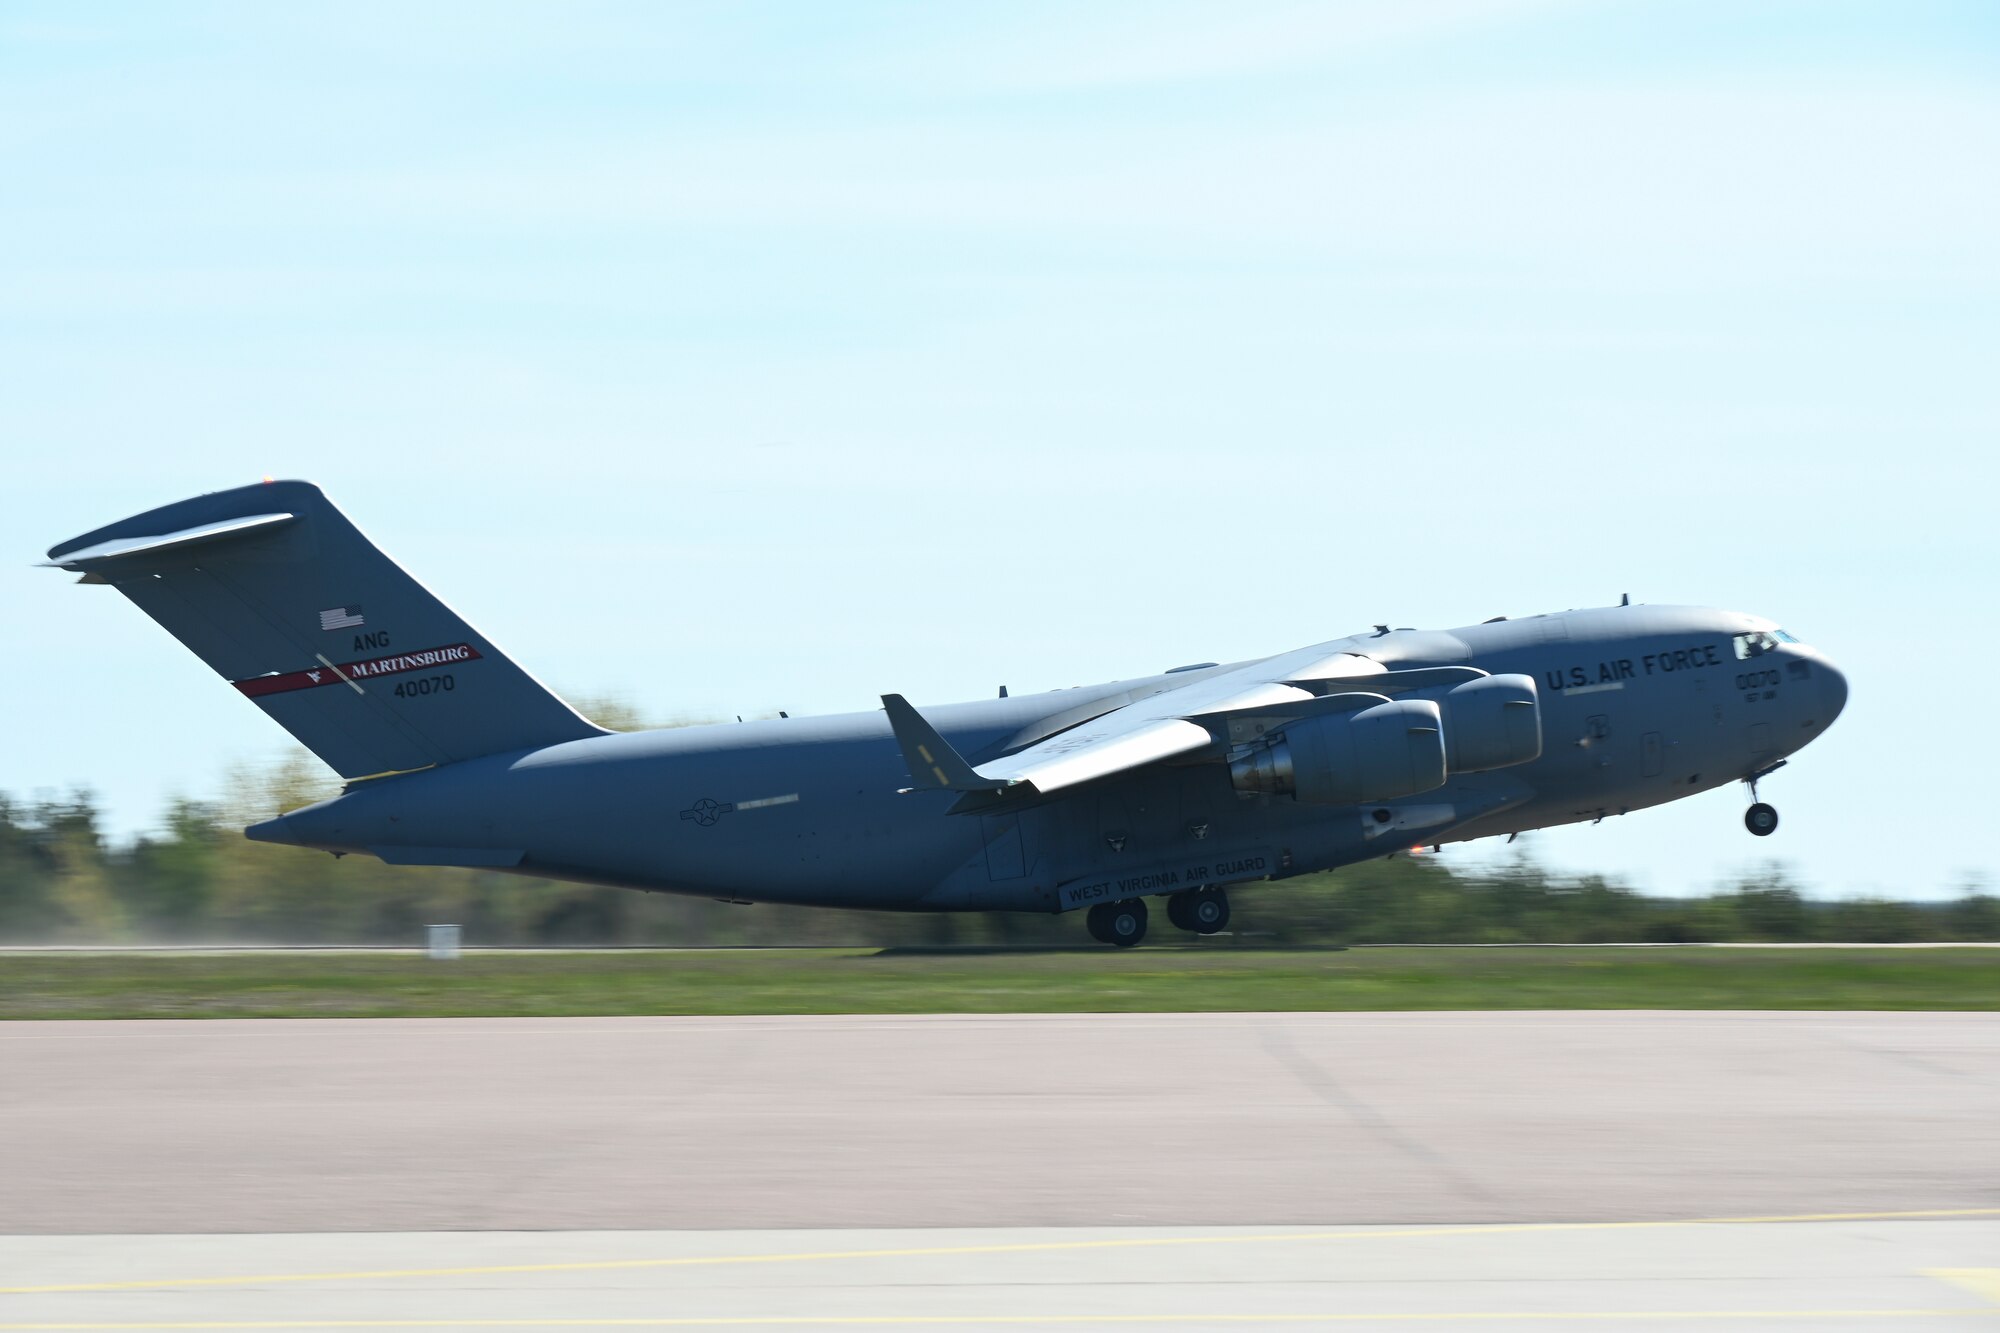 A C-17 Globemaster III aircraft assigned to the 167th Airlift Wing, West Virginia Air National Guard, takes off from Kuressaare Airport, carrying cargo and passengers supporting the Defender 22 exercise, May 23, 2022, in Saaremaa, Estonia.